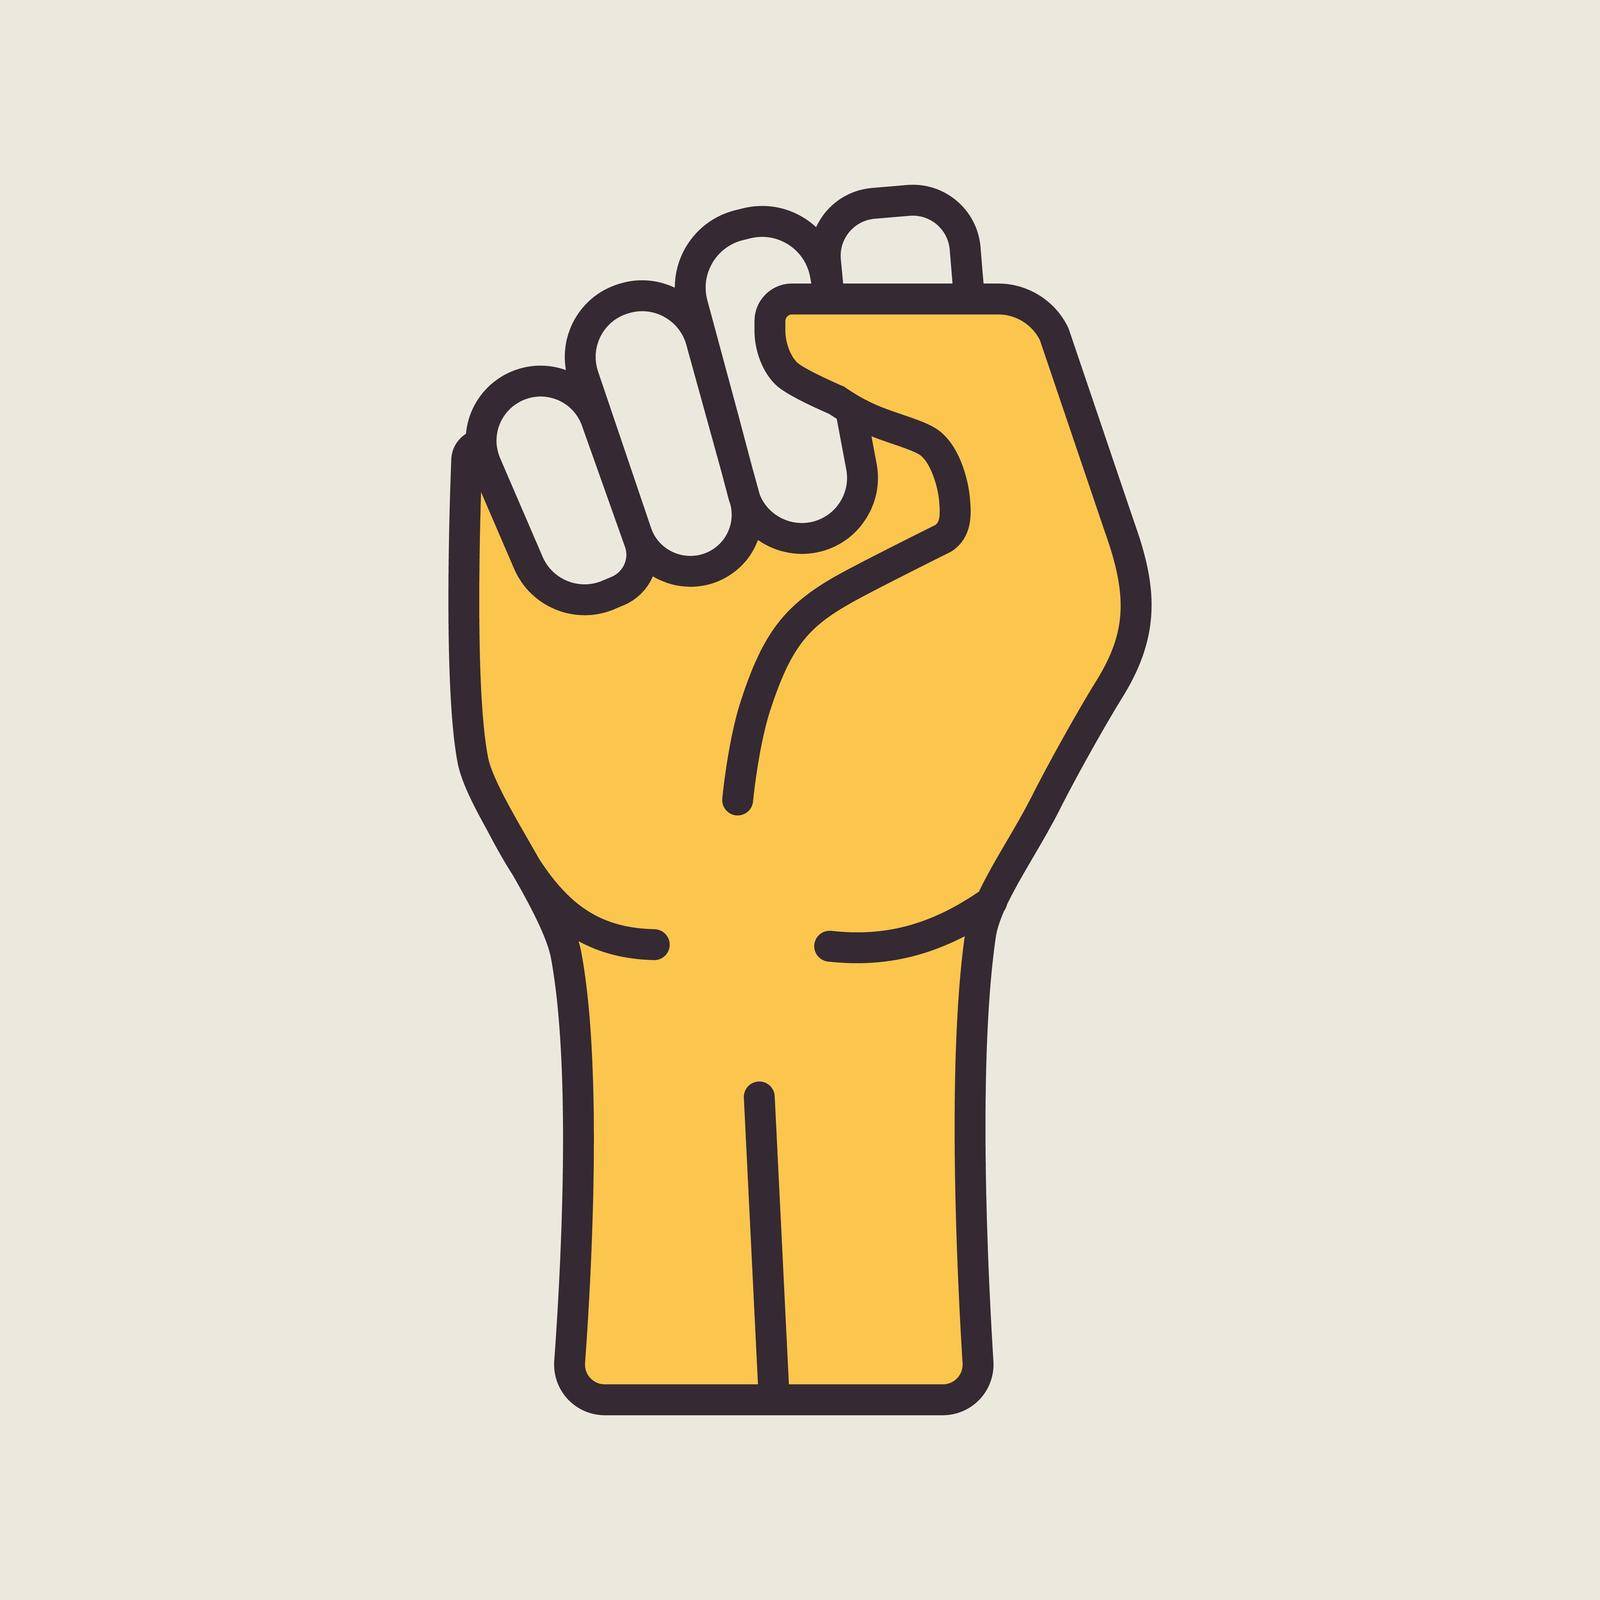 Fist raised up isolated vector icon by nosik